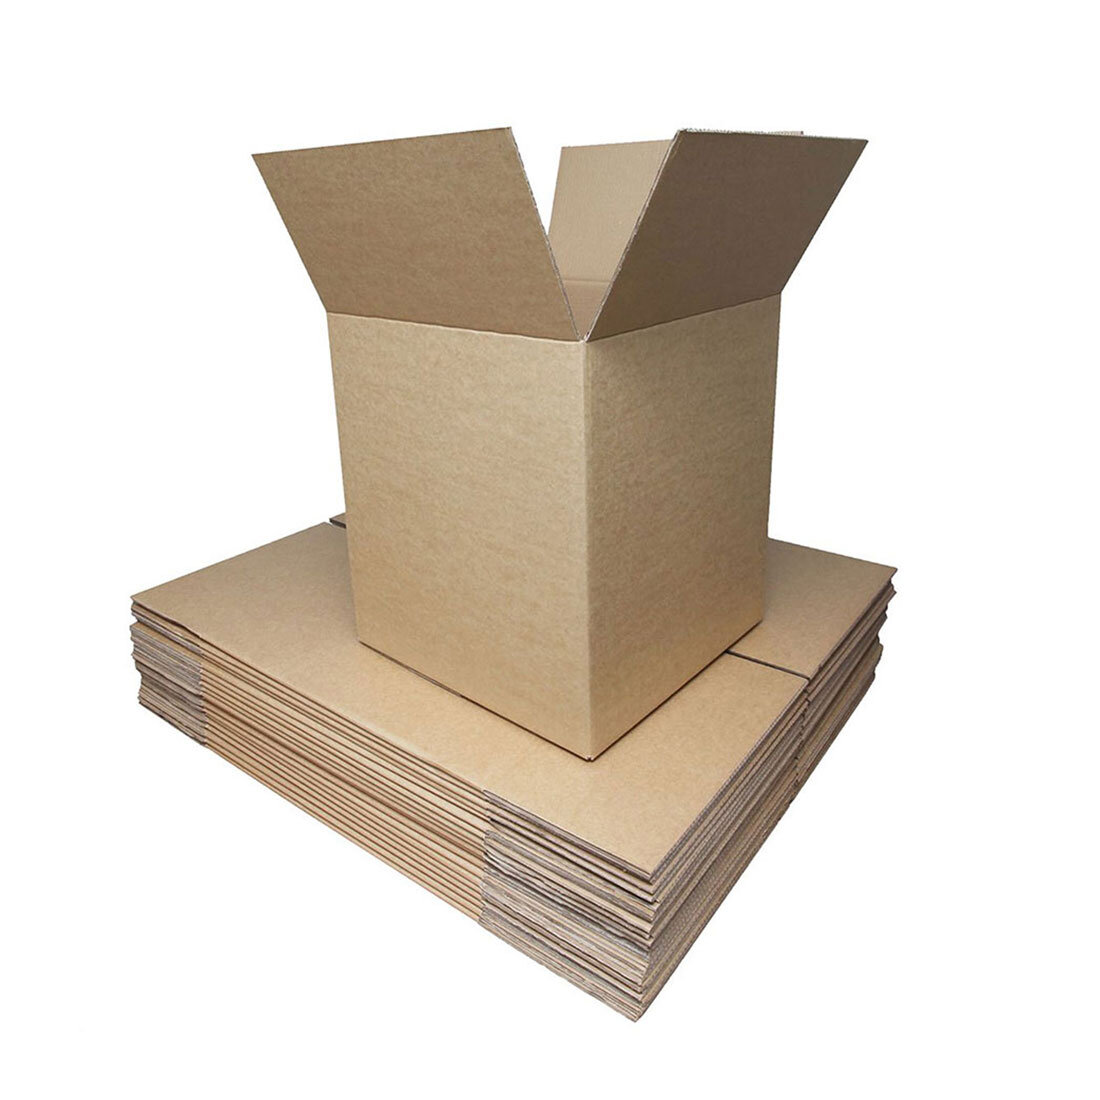 Double Wall Cardboard Boxes Information